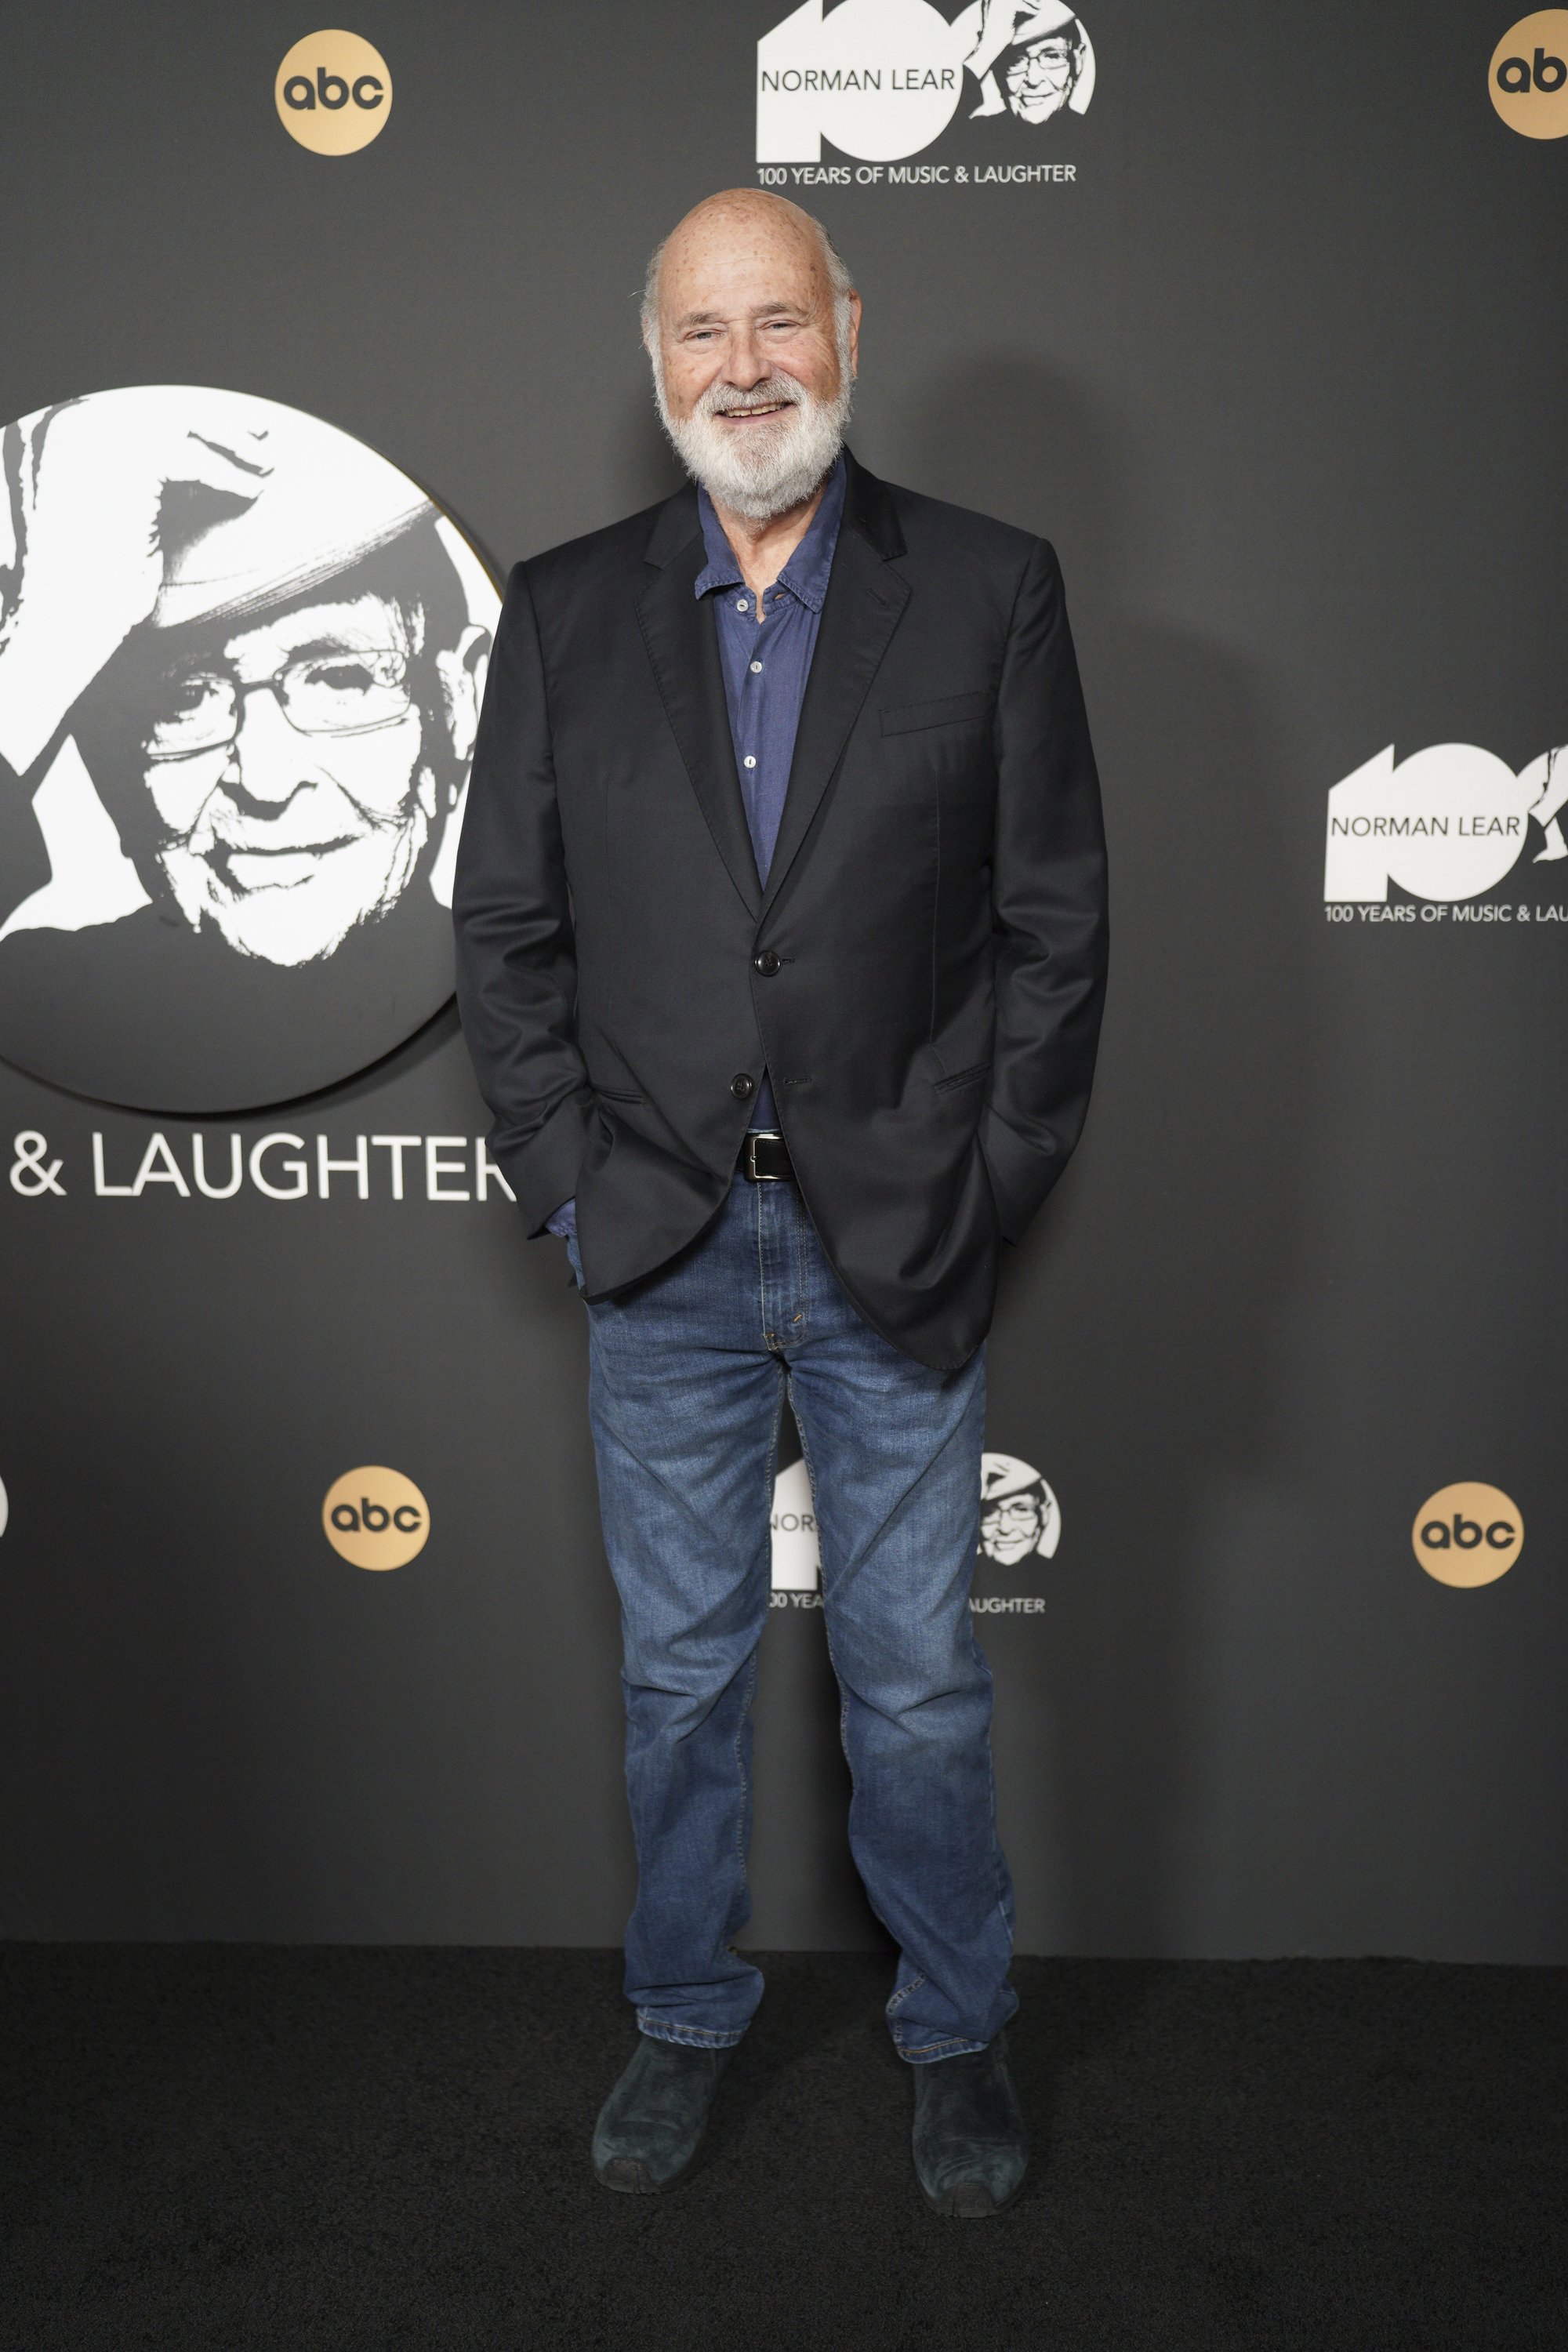 Rob Reiner at ABC's special event to honor creator and writer Norman Lear on his 100th birthday celebration | Source: Getty Images